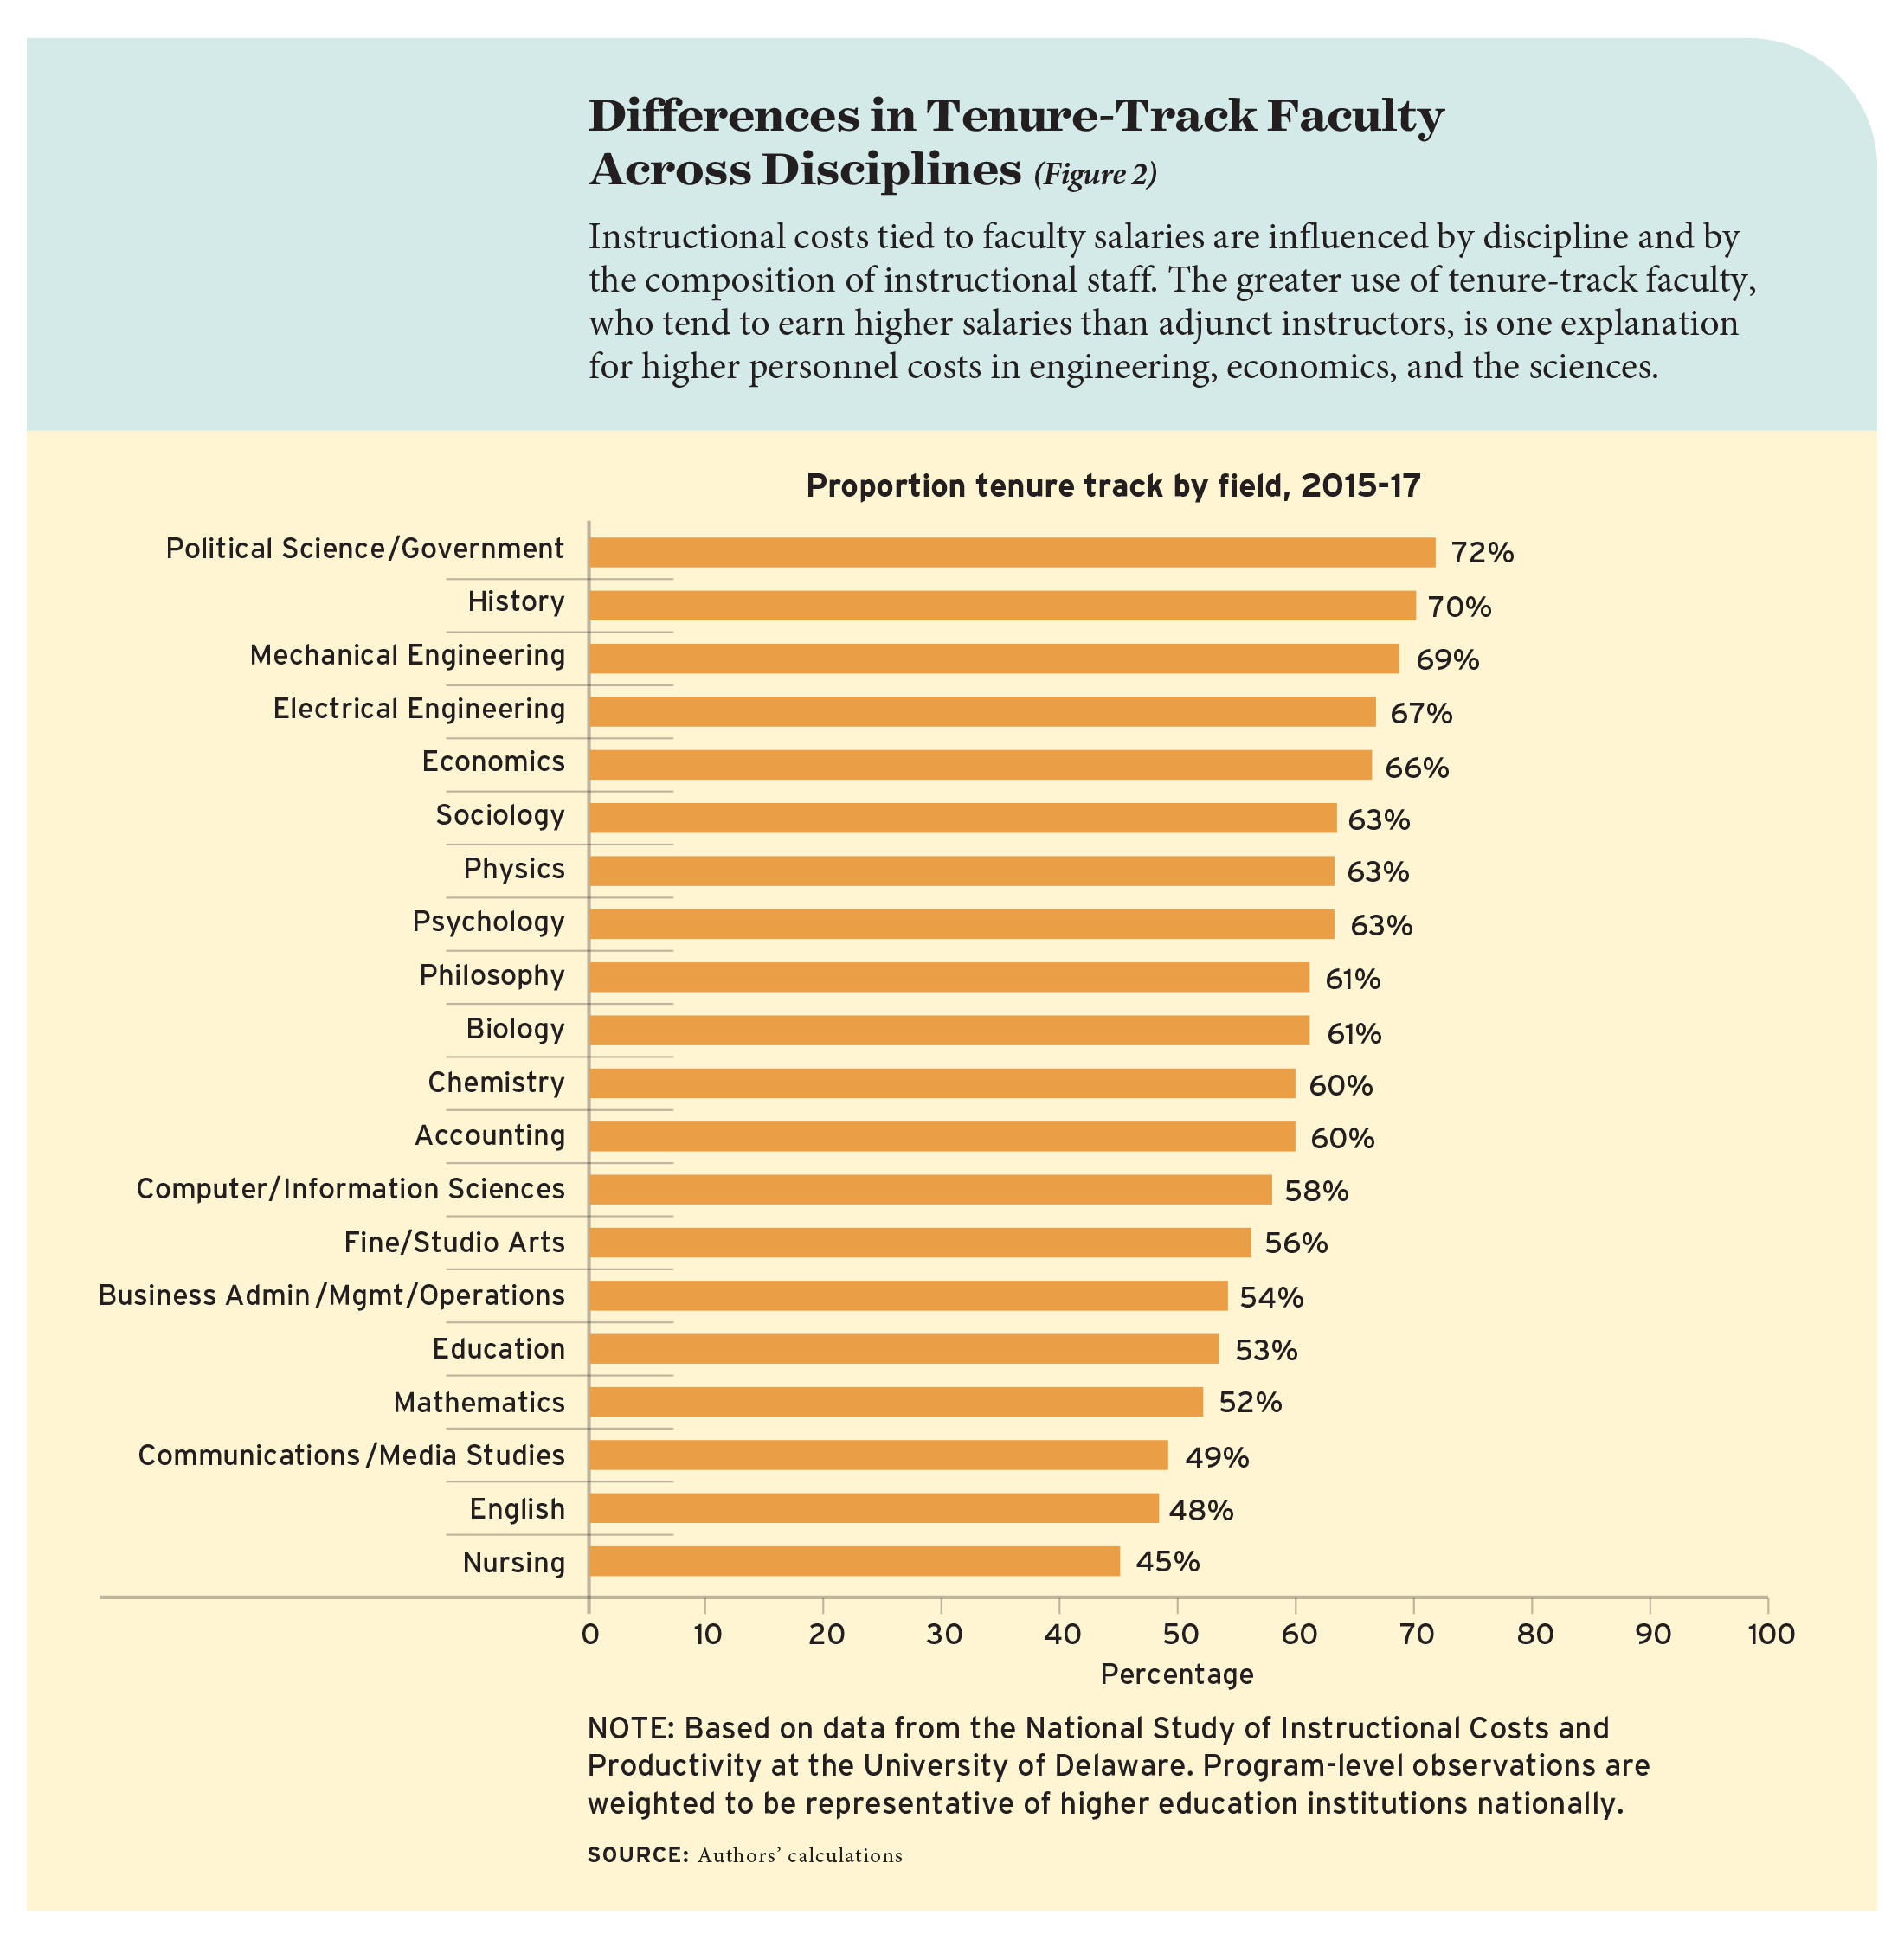 Differences in Tenure-Track Faculty Across Disciplines (Figure 2)